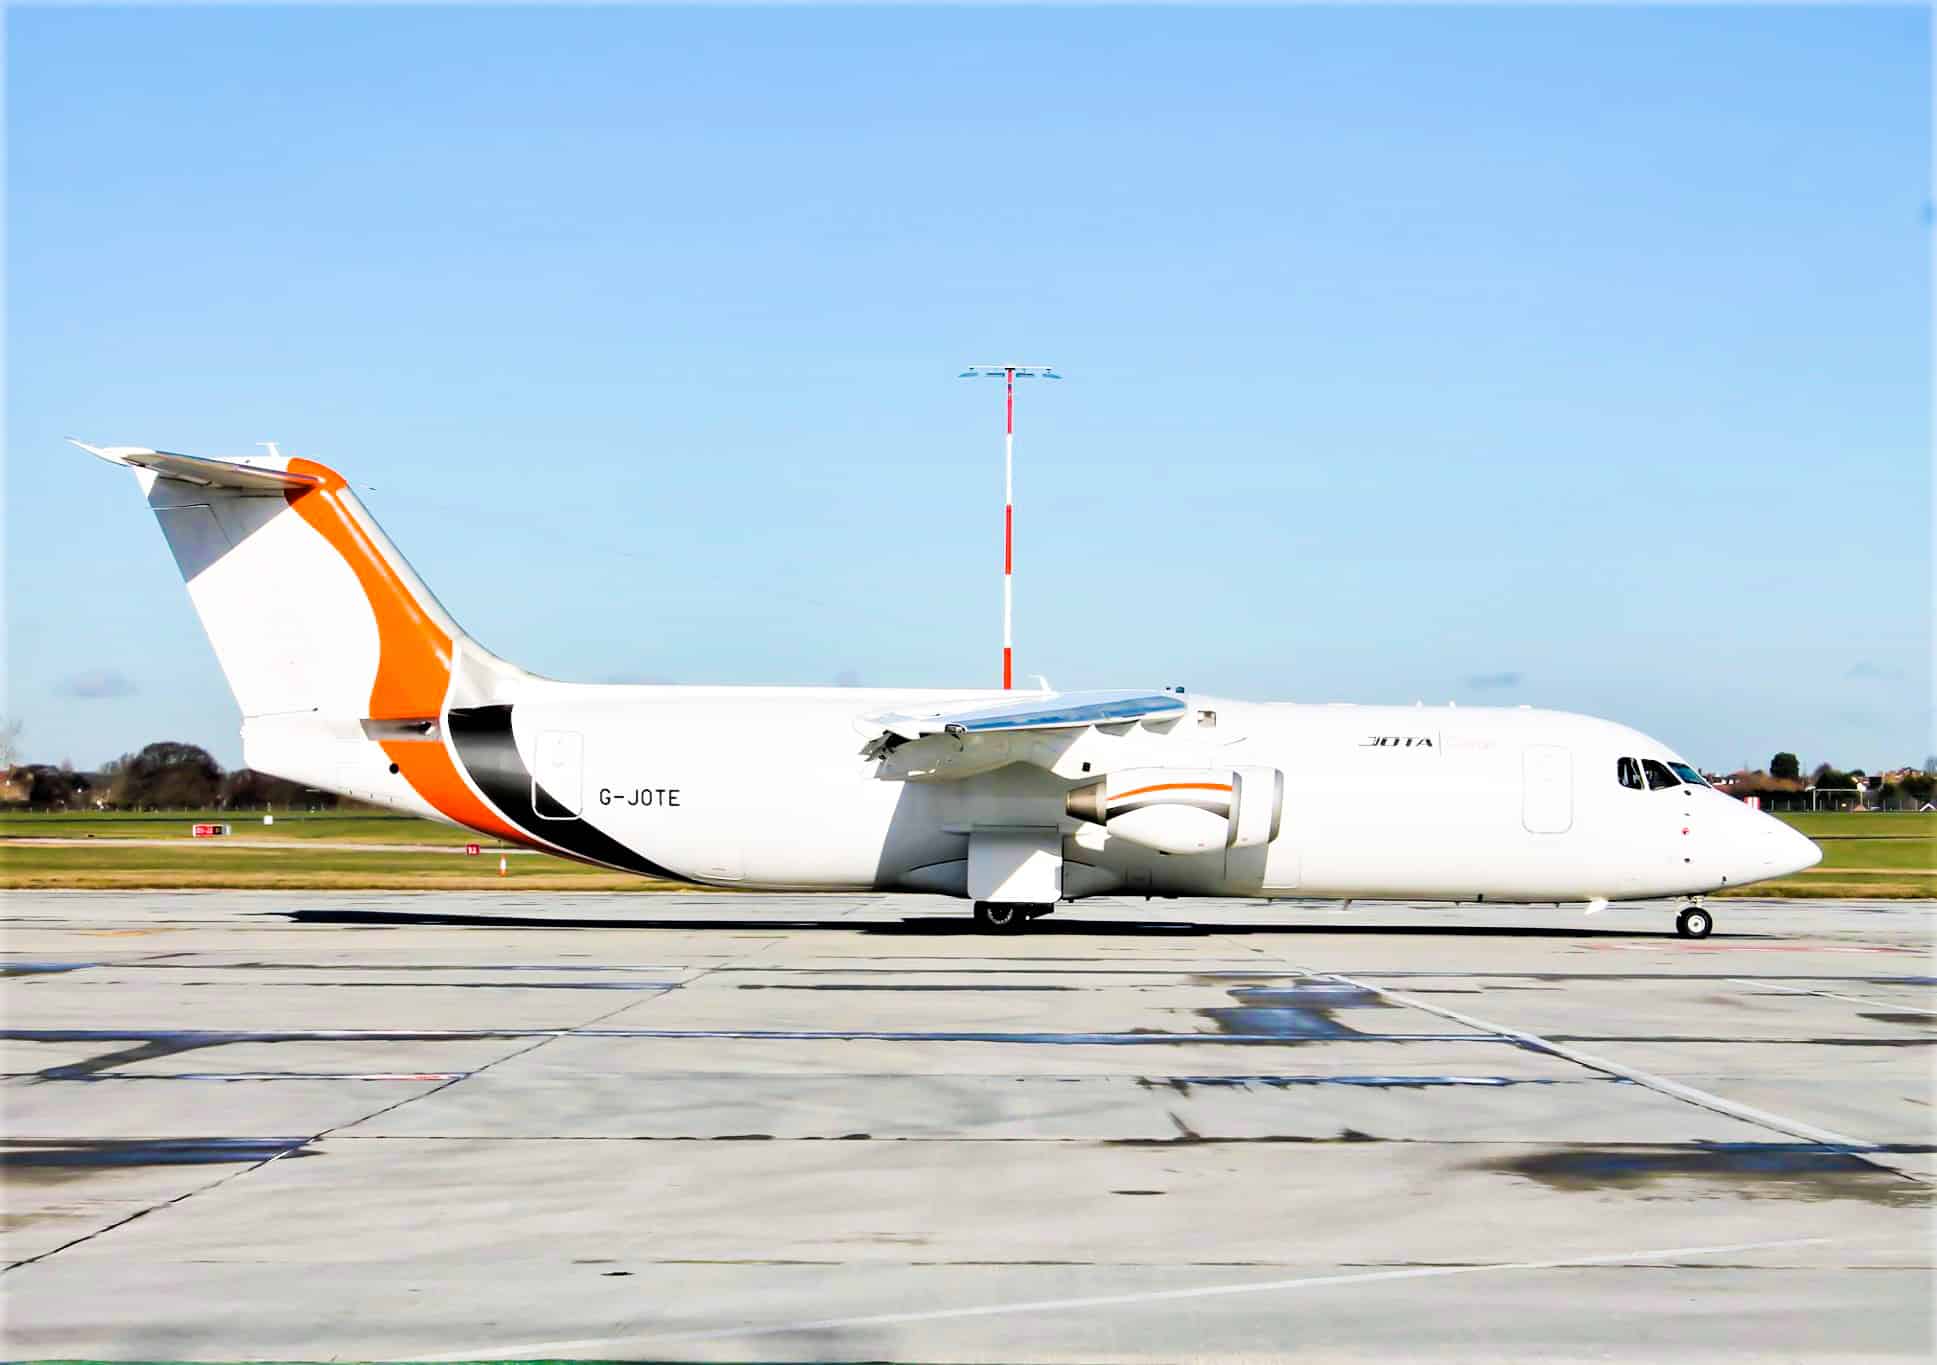 Everts Air Cargo adds BAe 146-300QTs